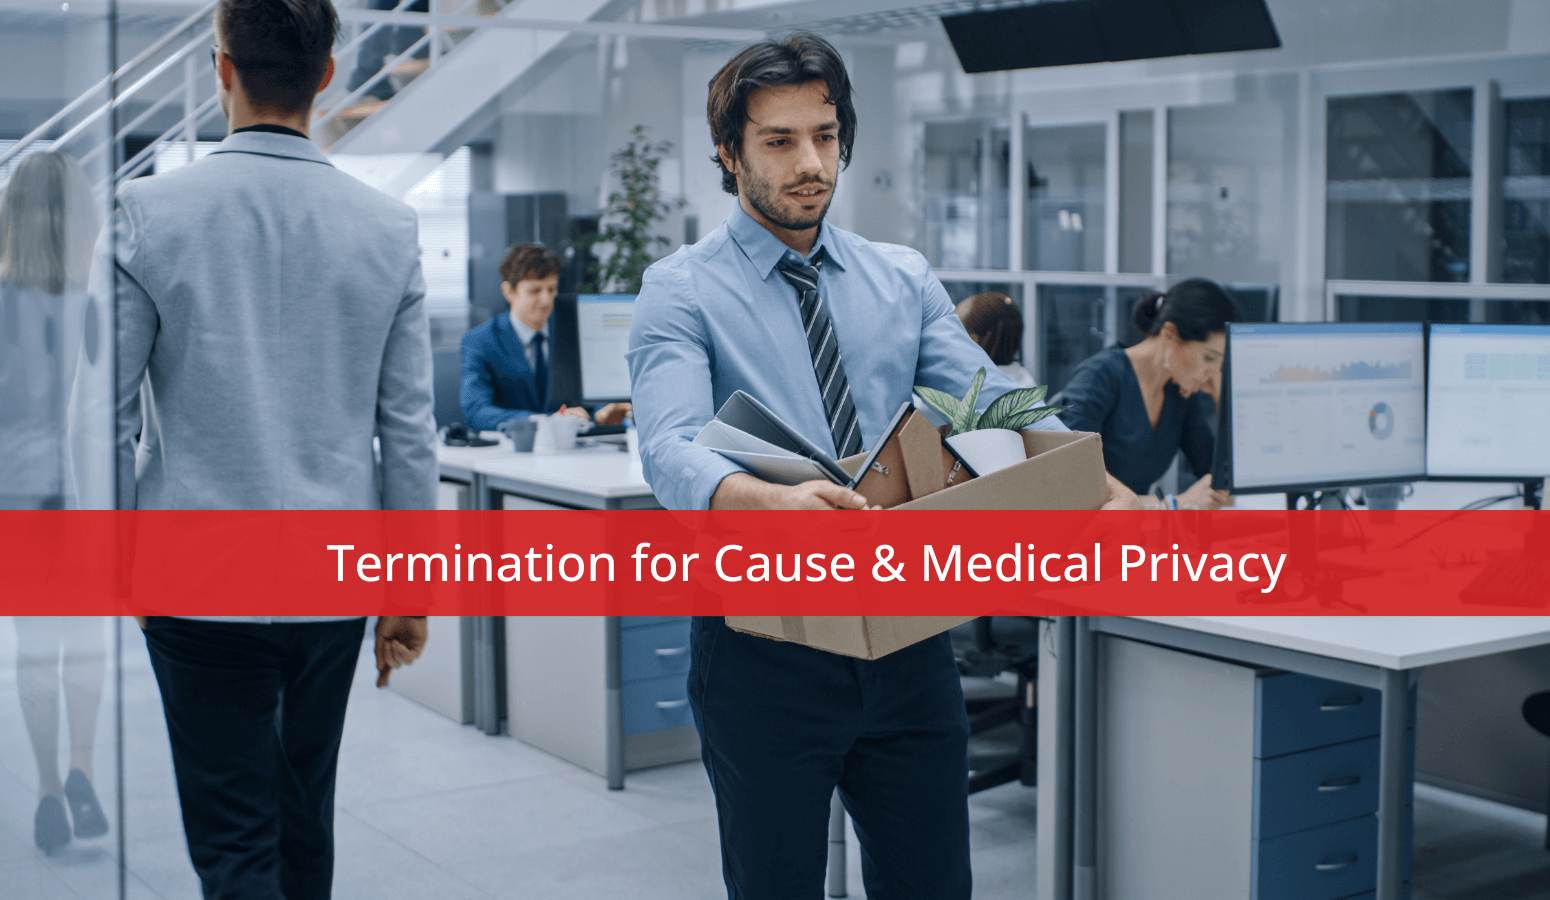 Featured image for “Termination for Cause & Medical Privacy”